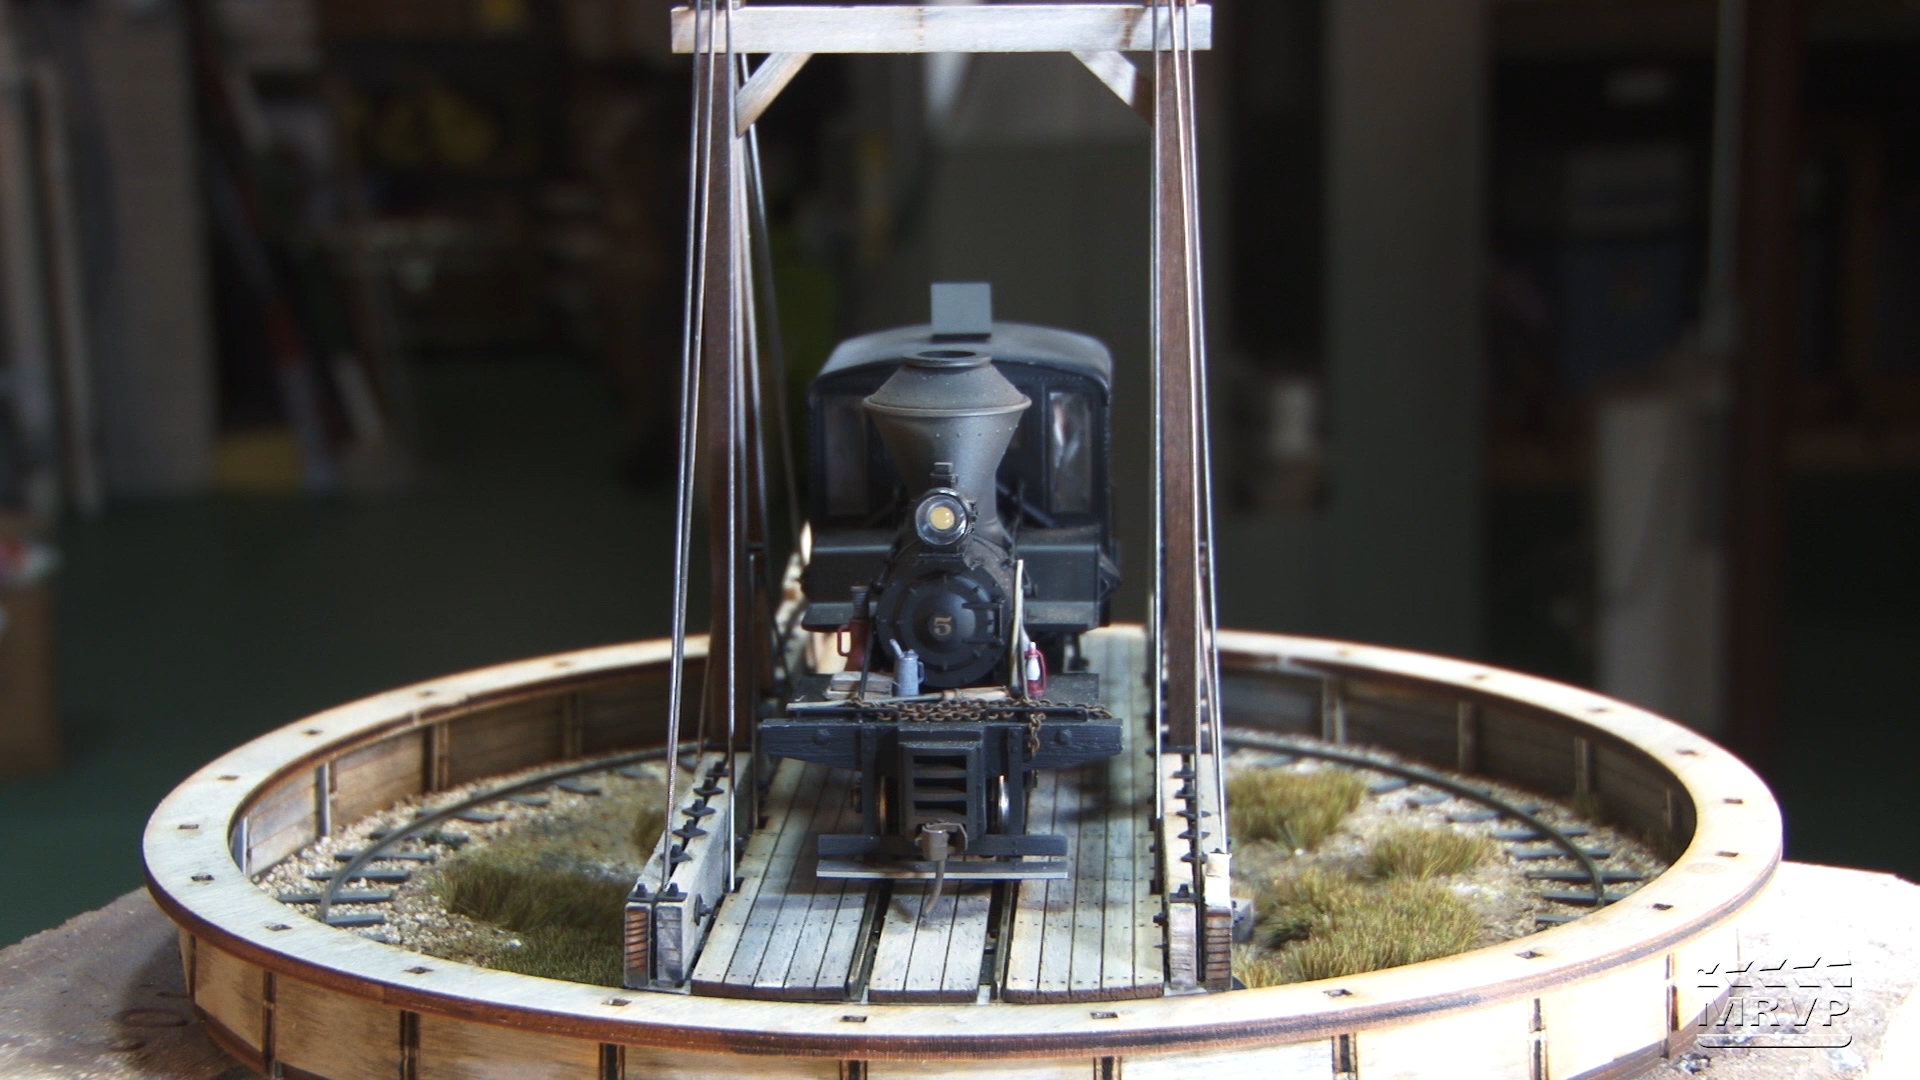 How-to Library: Building a turntable, Part 7 – Add finishing details and scenery